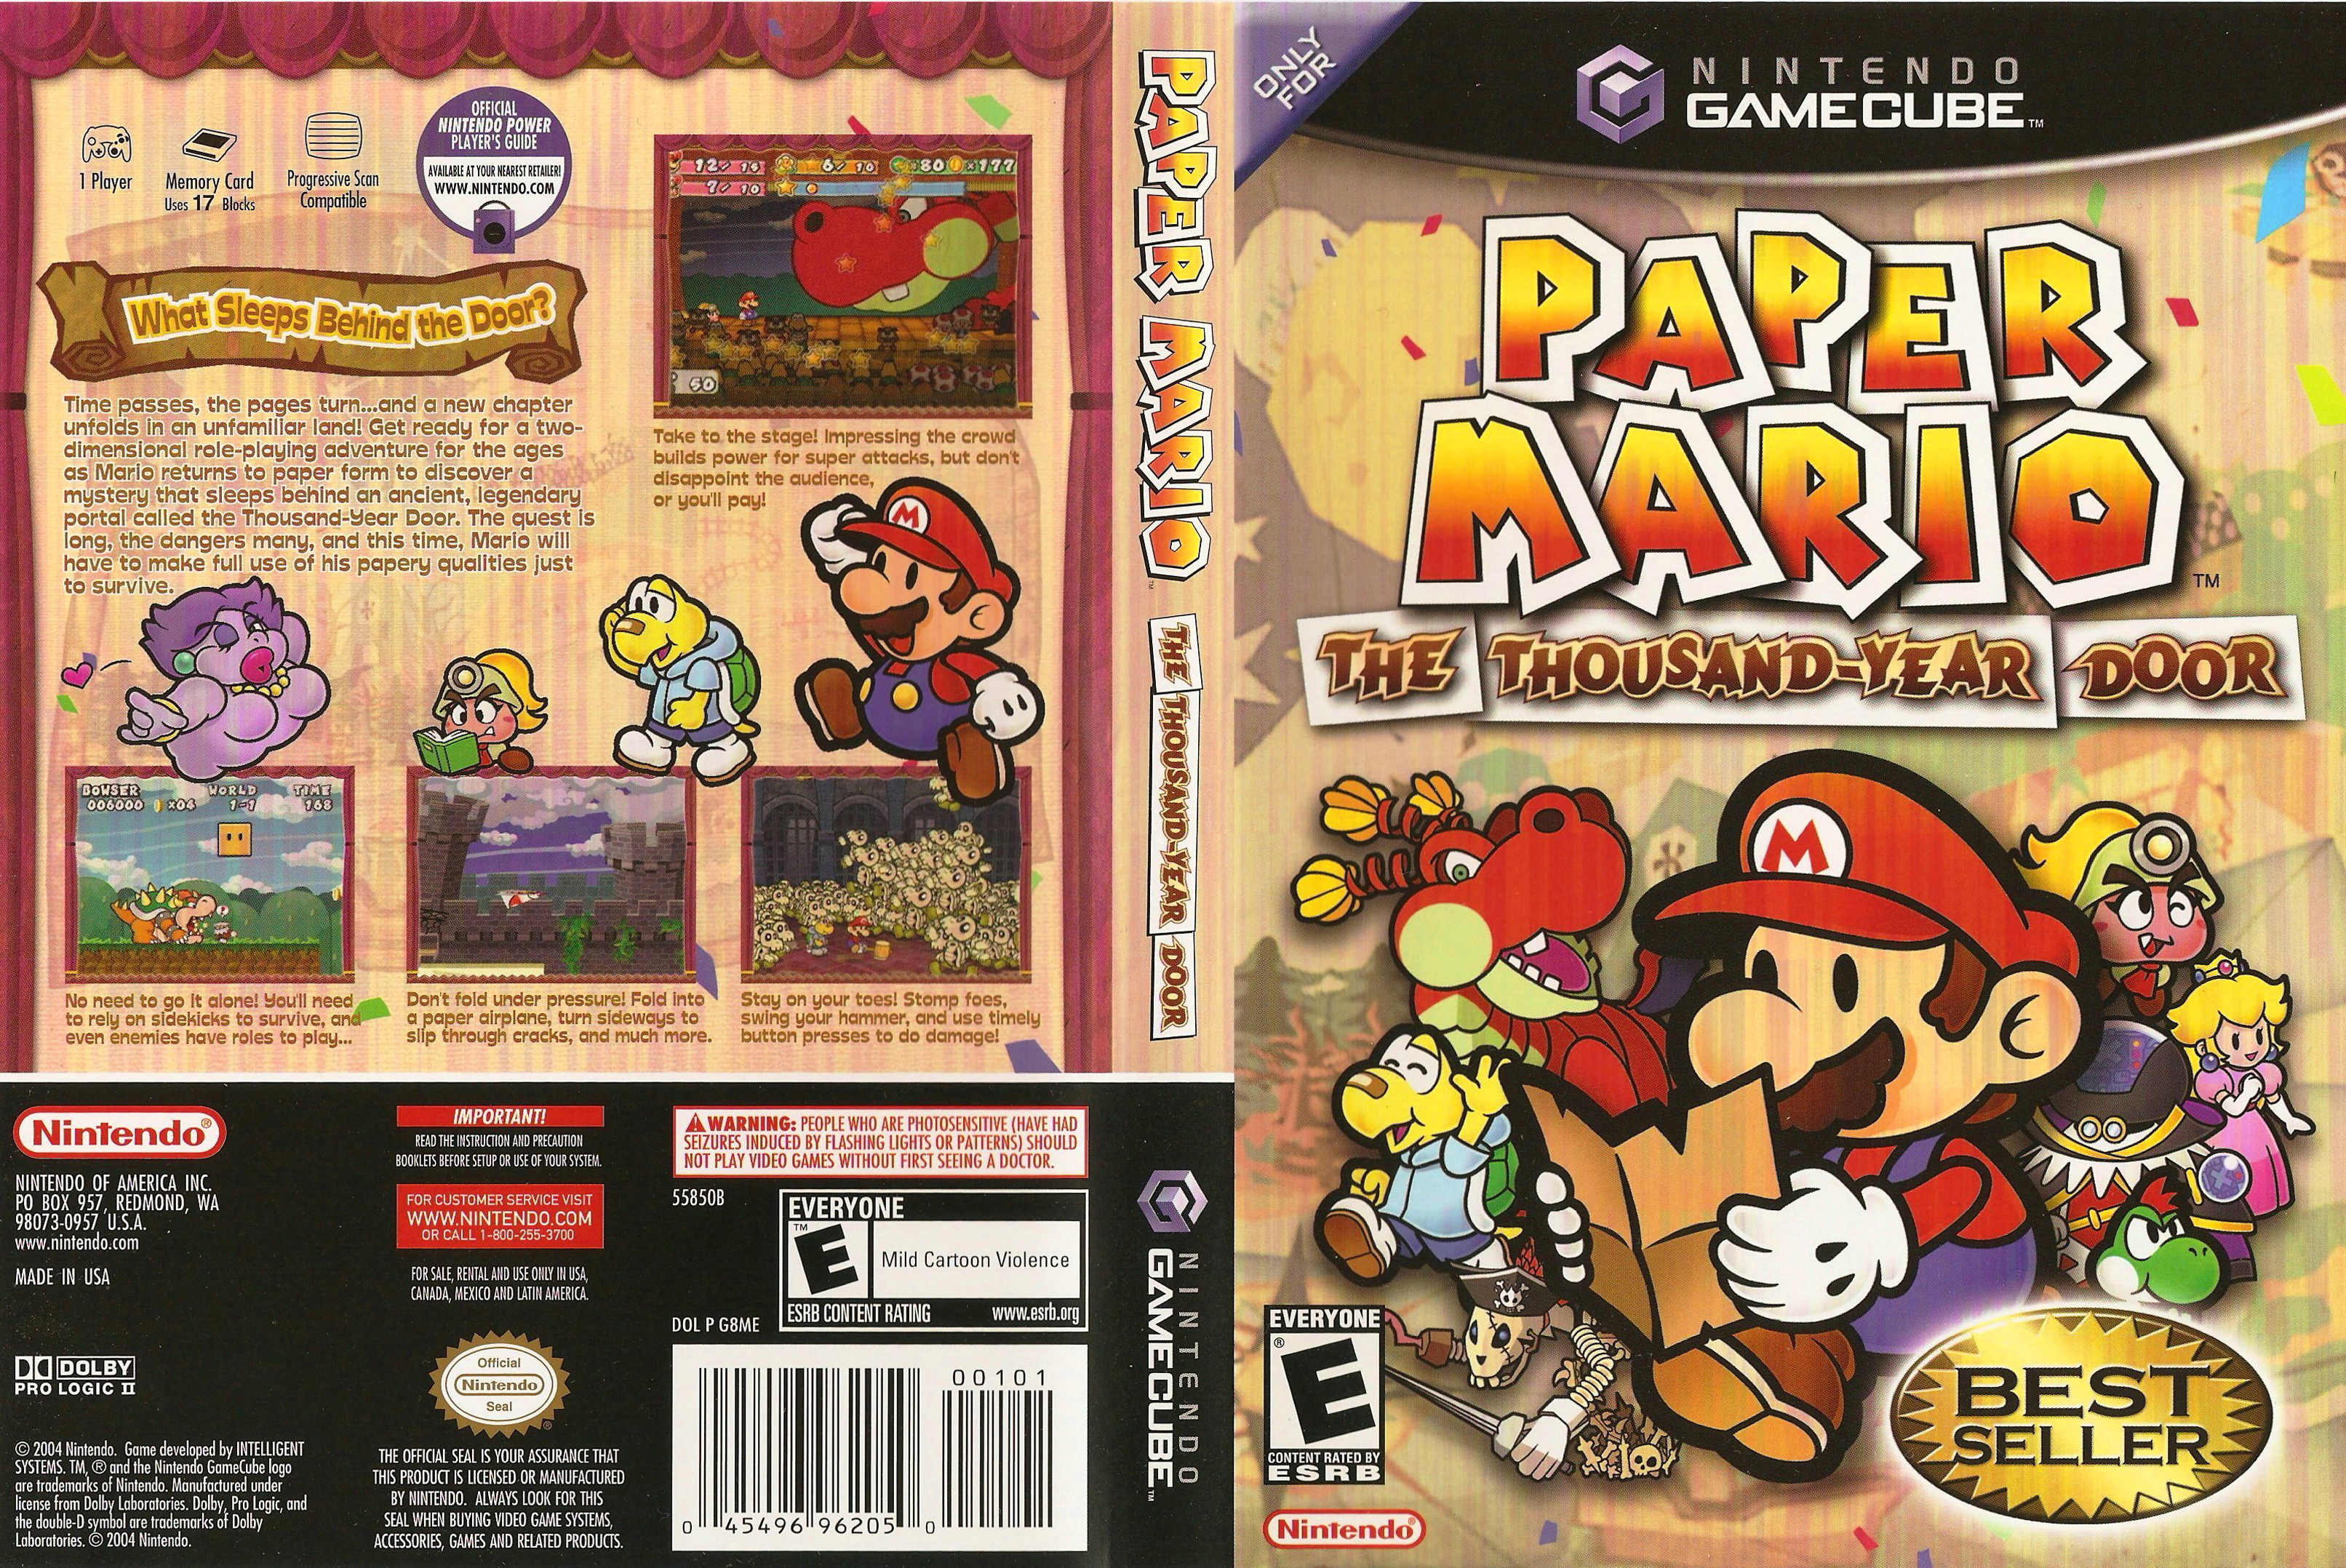 Paper Mario : The House and Year Door